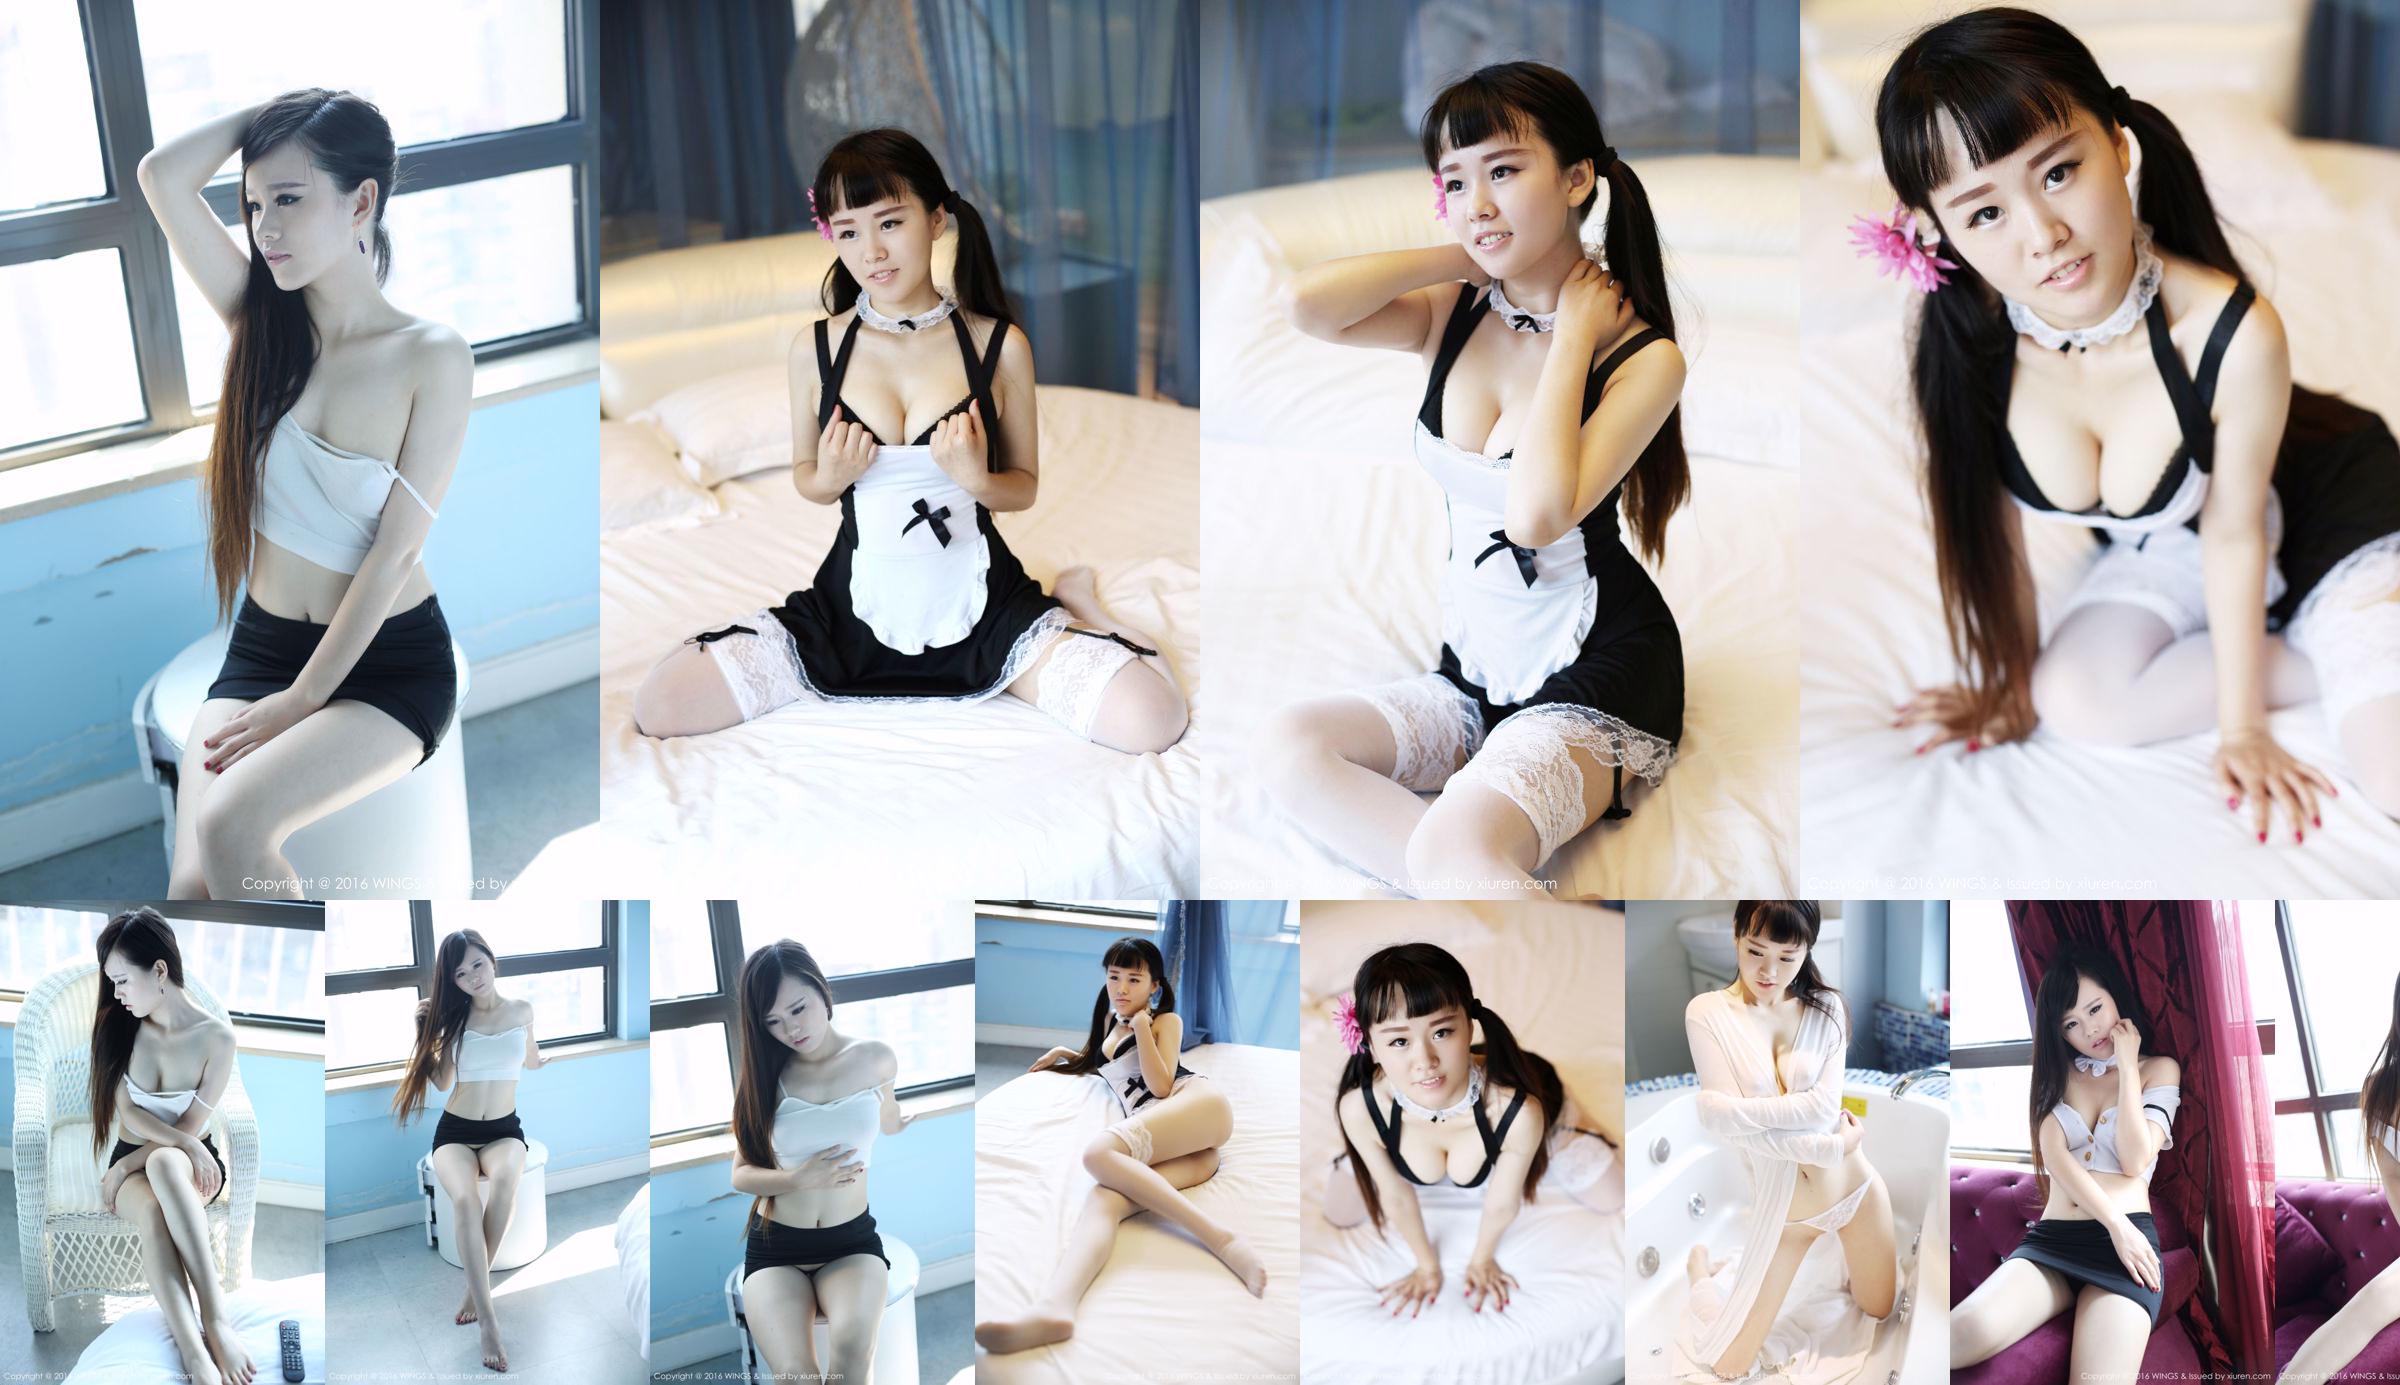 Meow Meow Cyan "Lace Maid + Bathtub Temptation" [WingS影私荟] Vol.005 No.819074 Page 8